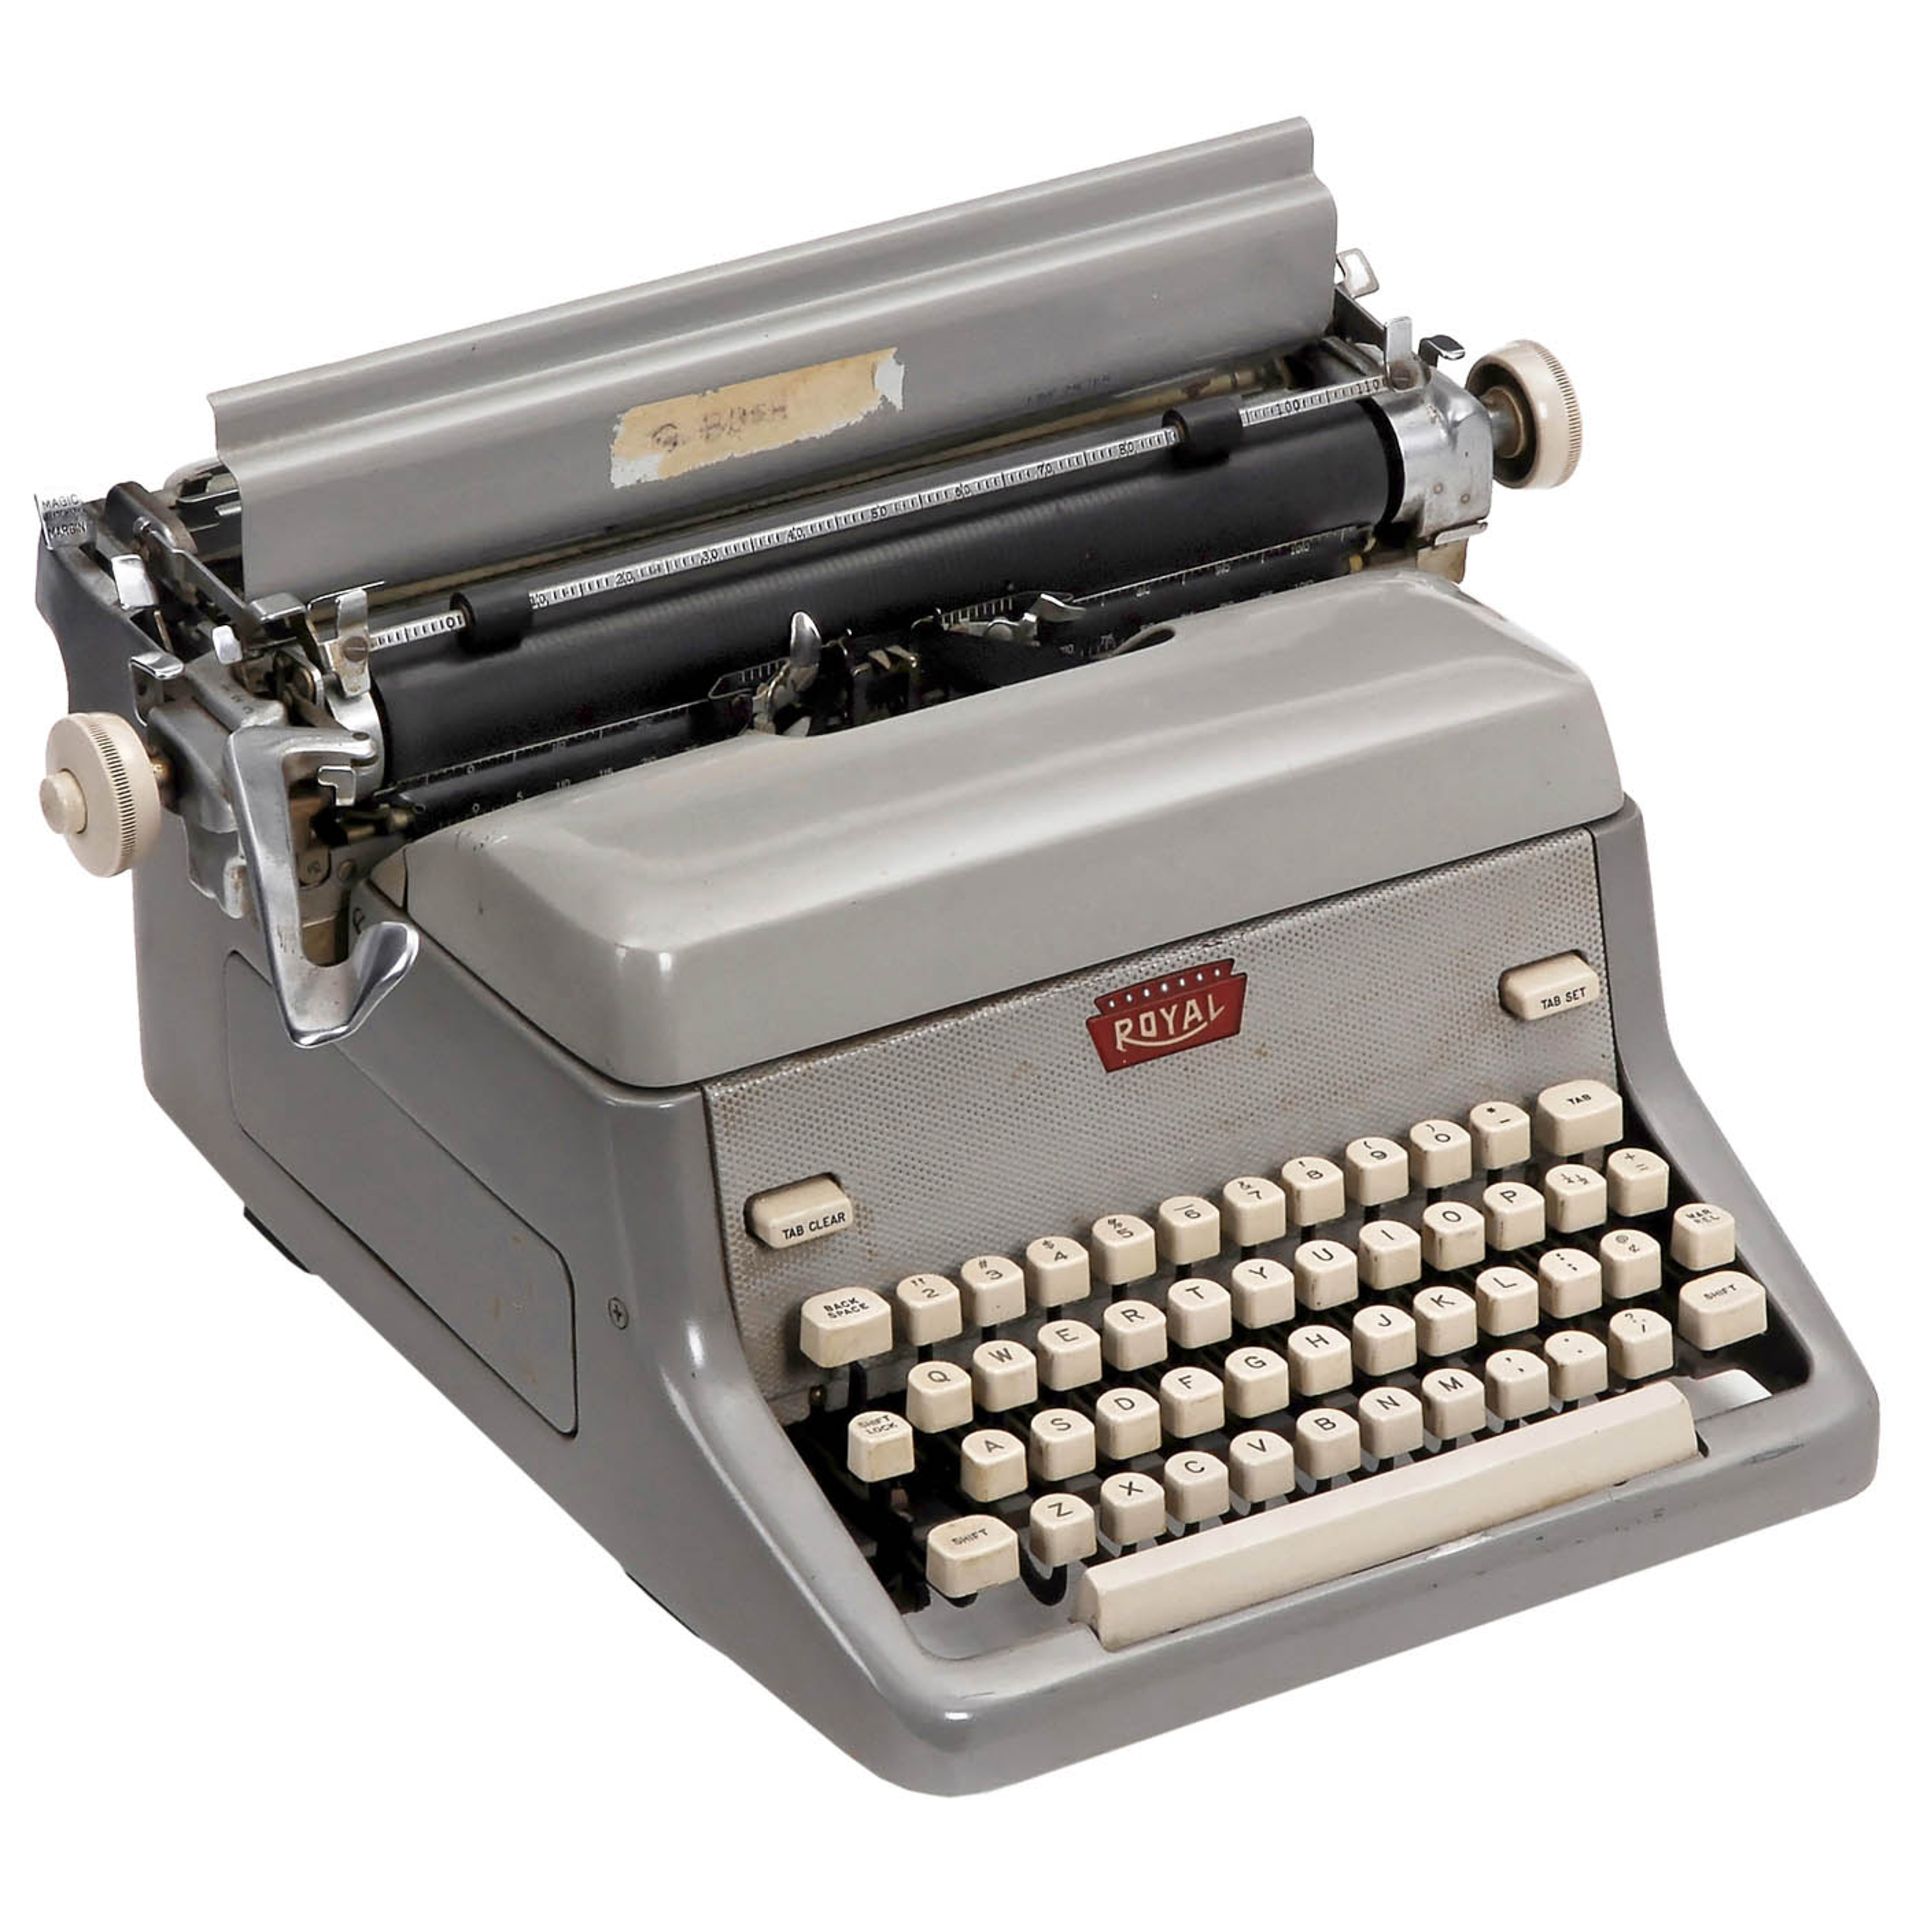 4 American Typewriters for Demonstration Purposes - Image 5 of 5